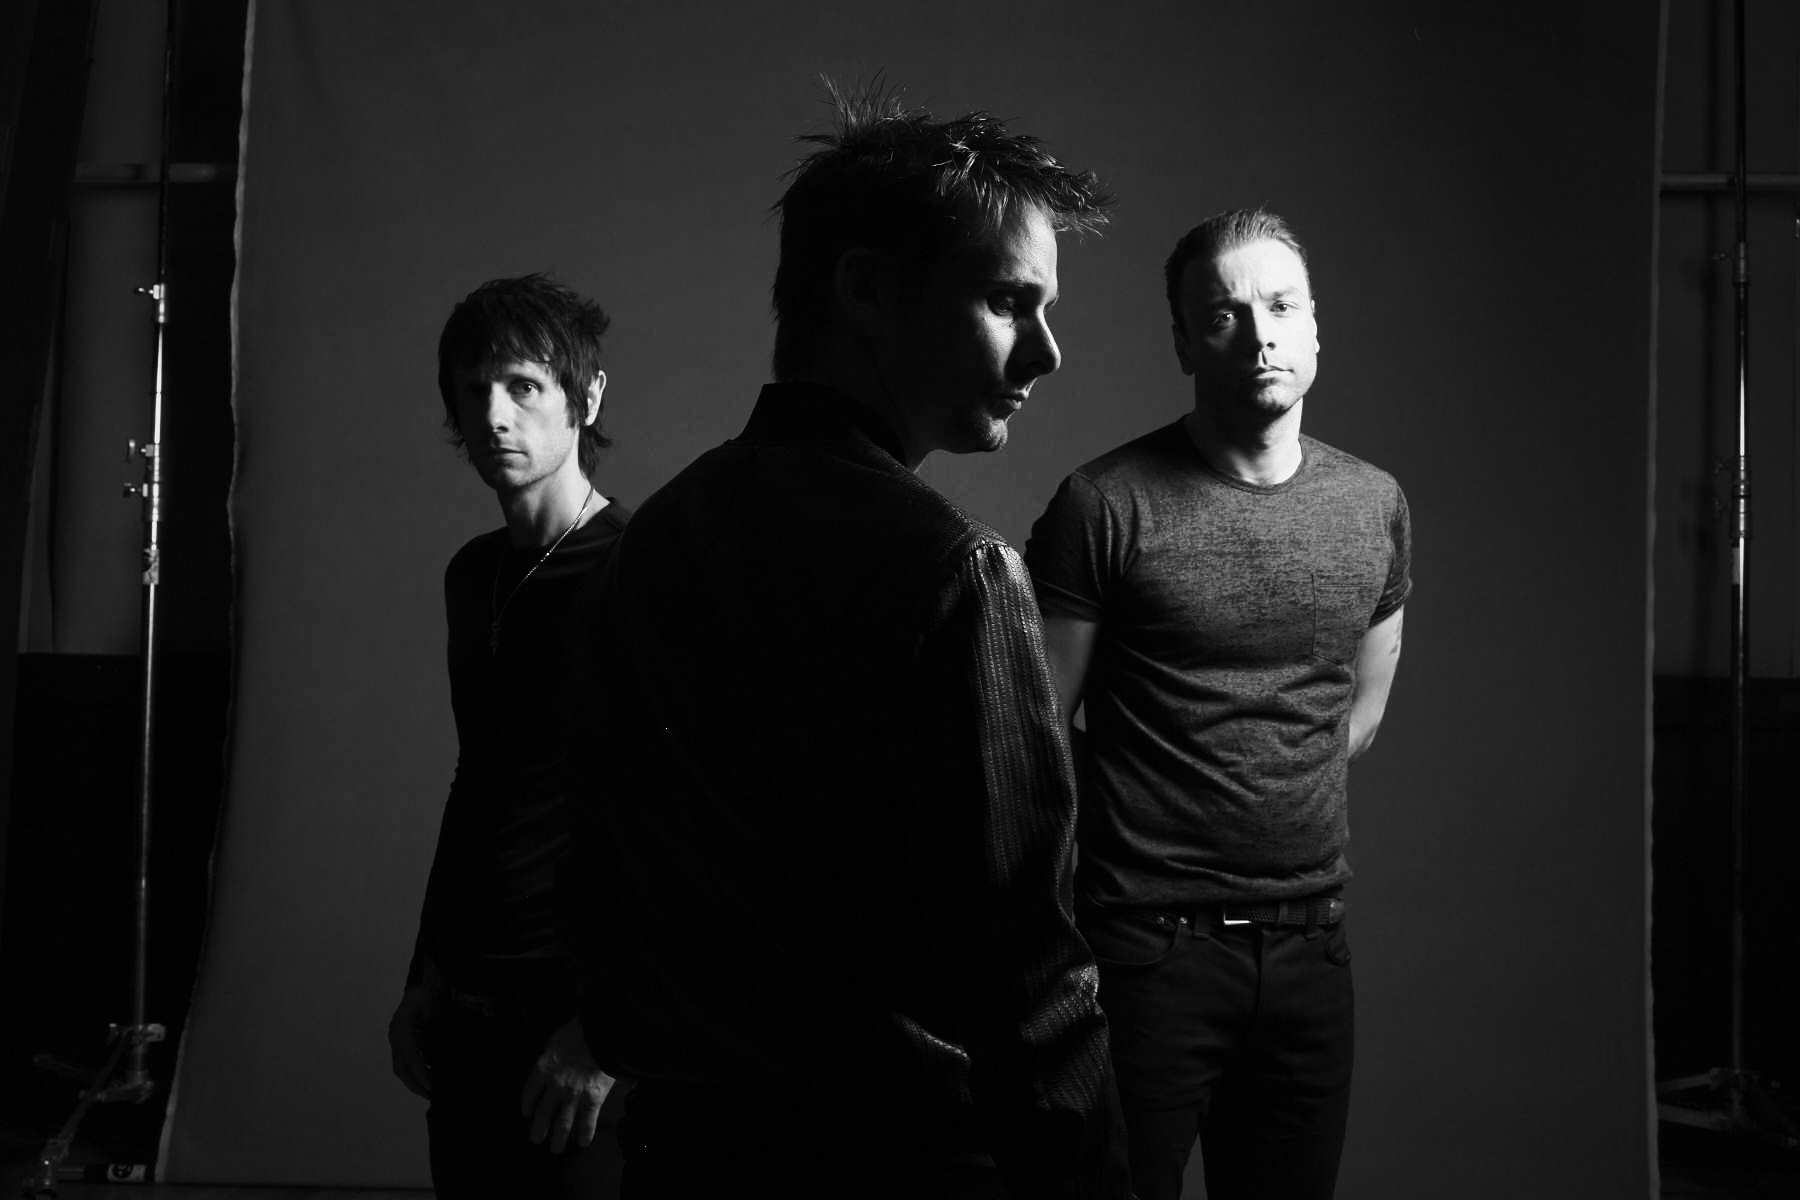 Muse to Headline at the Barclays Center on Jan. 27